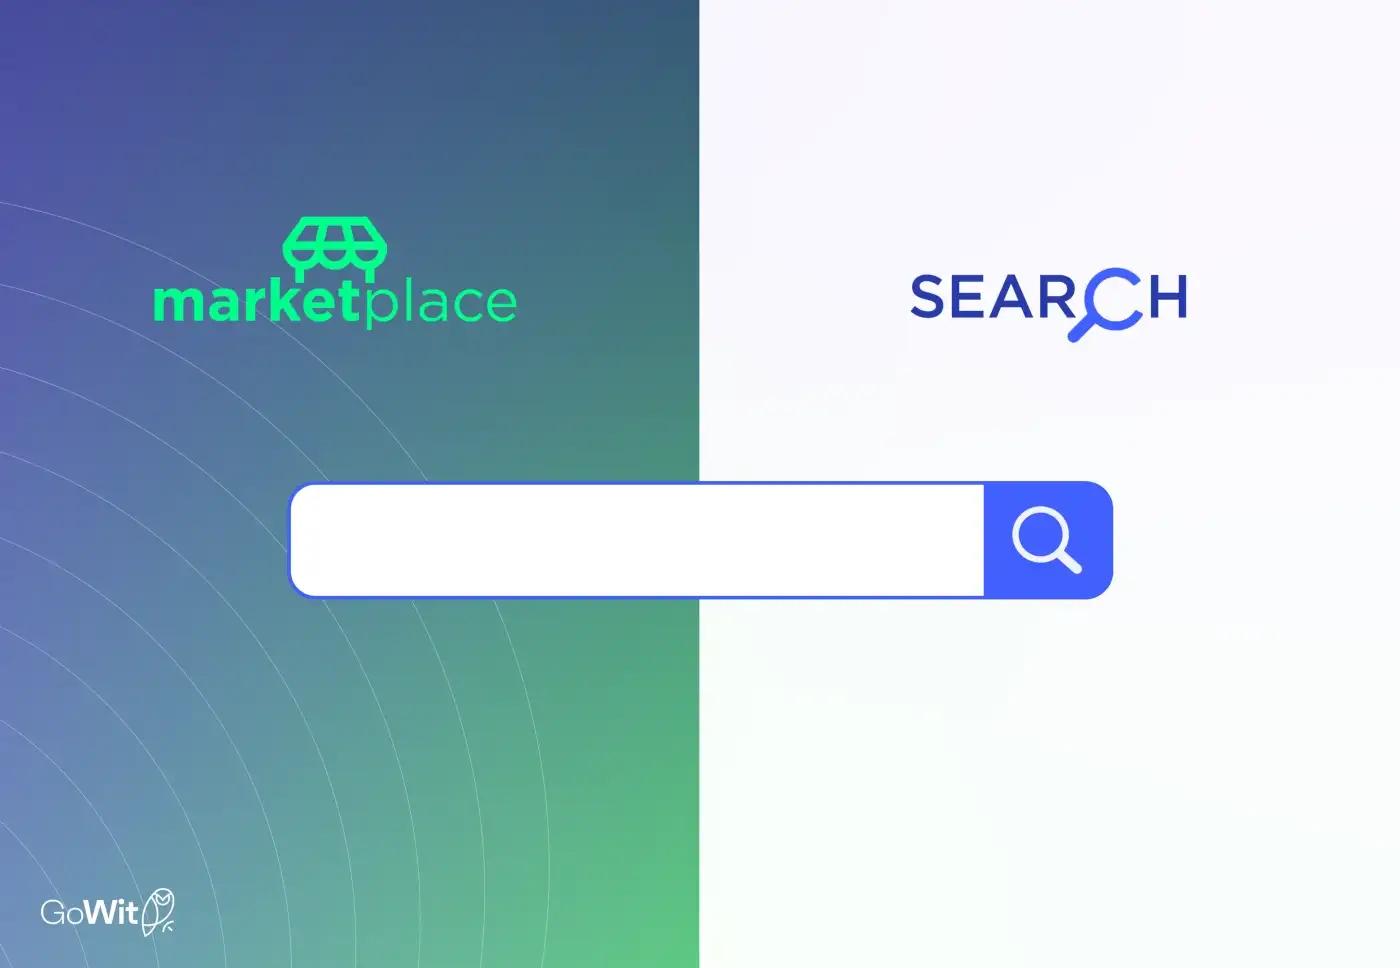 Online marketplaces are the new search engines.